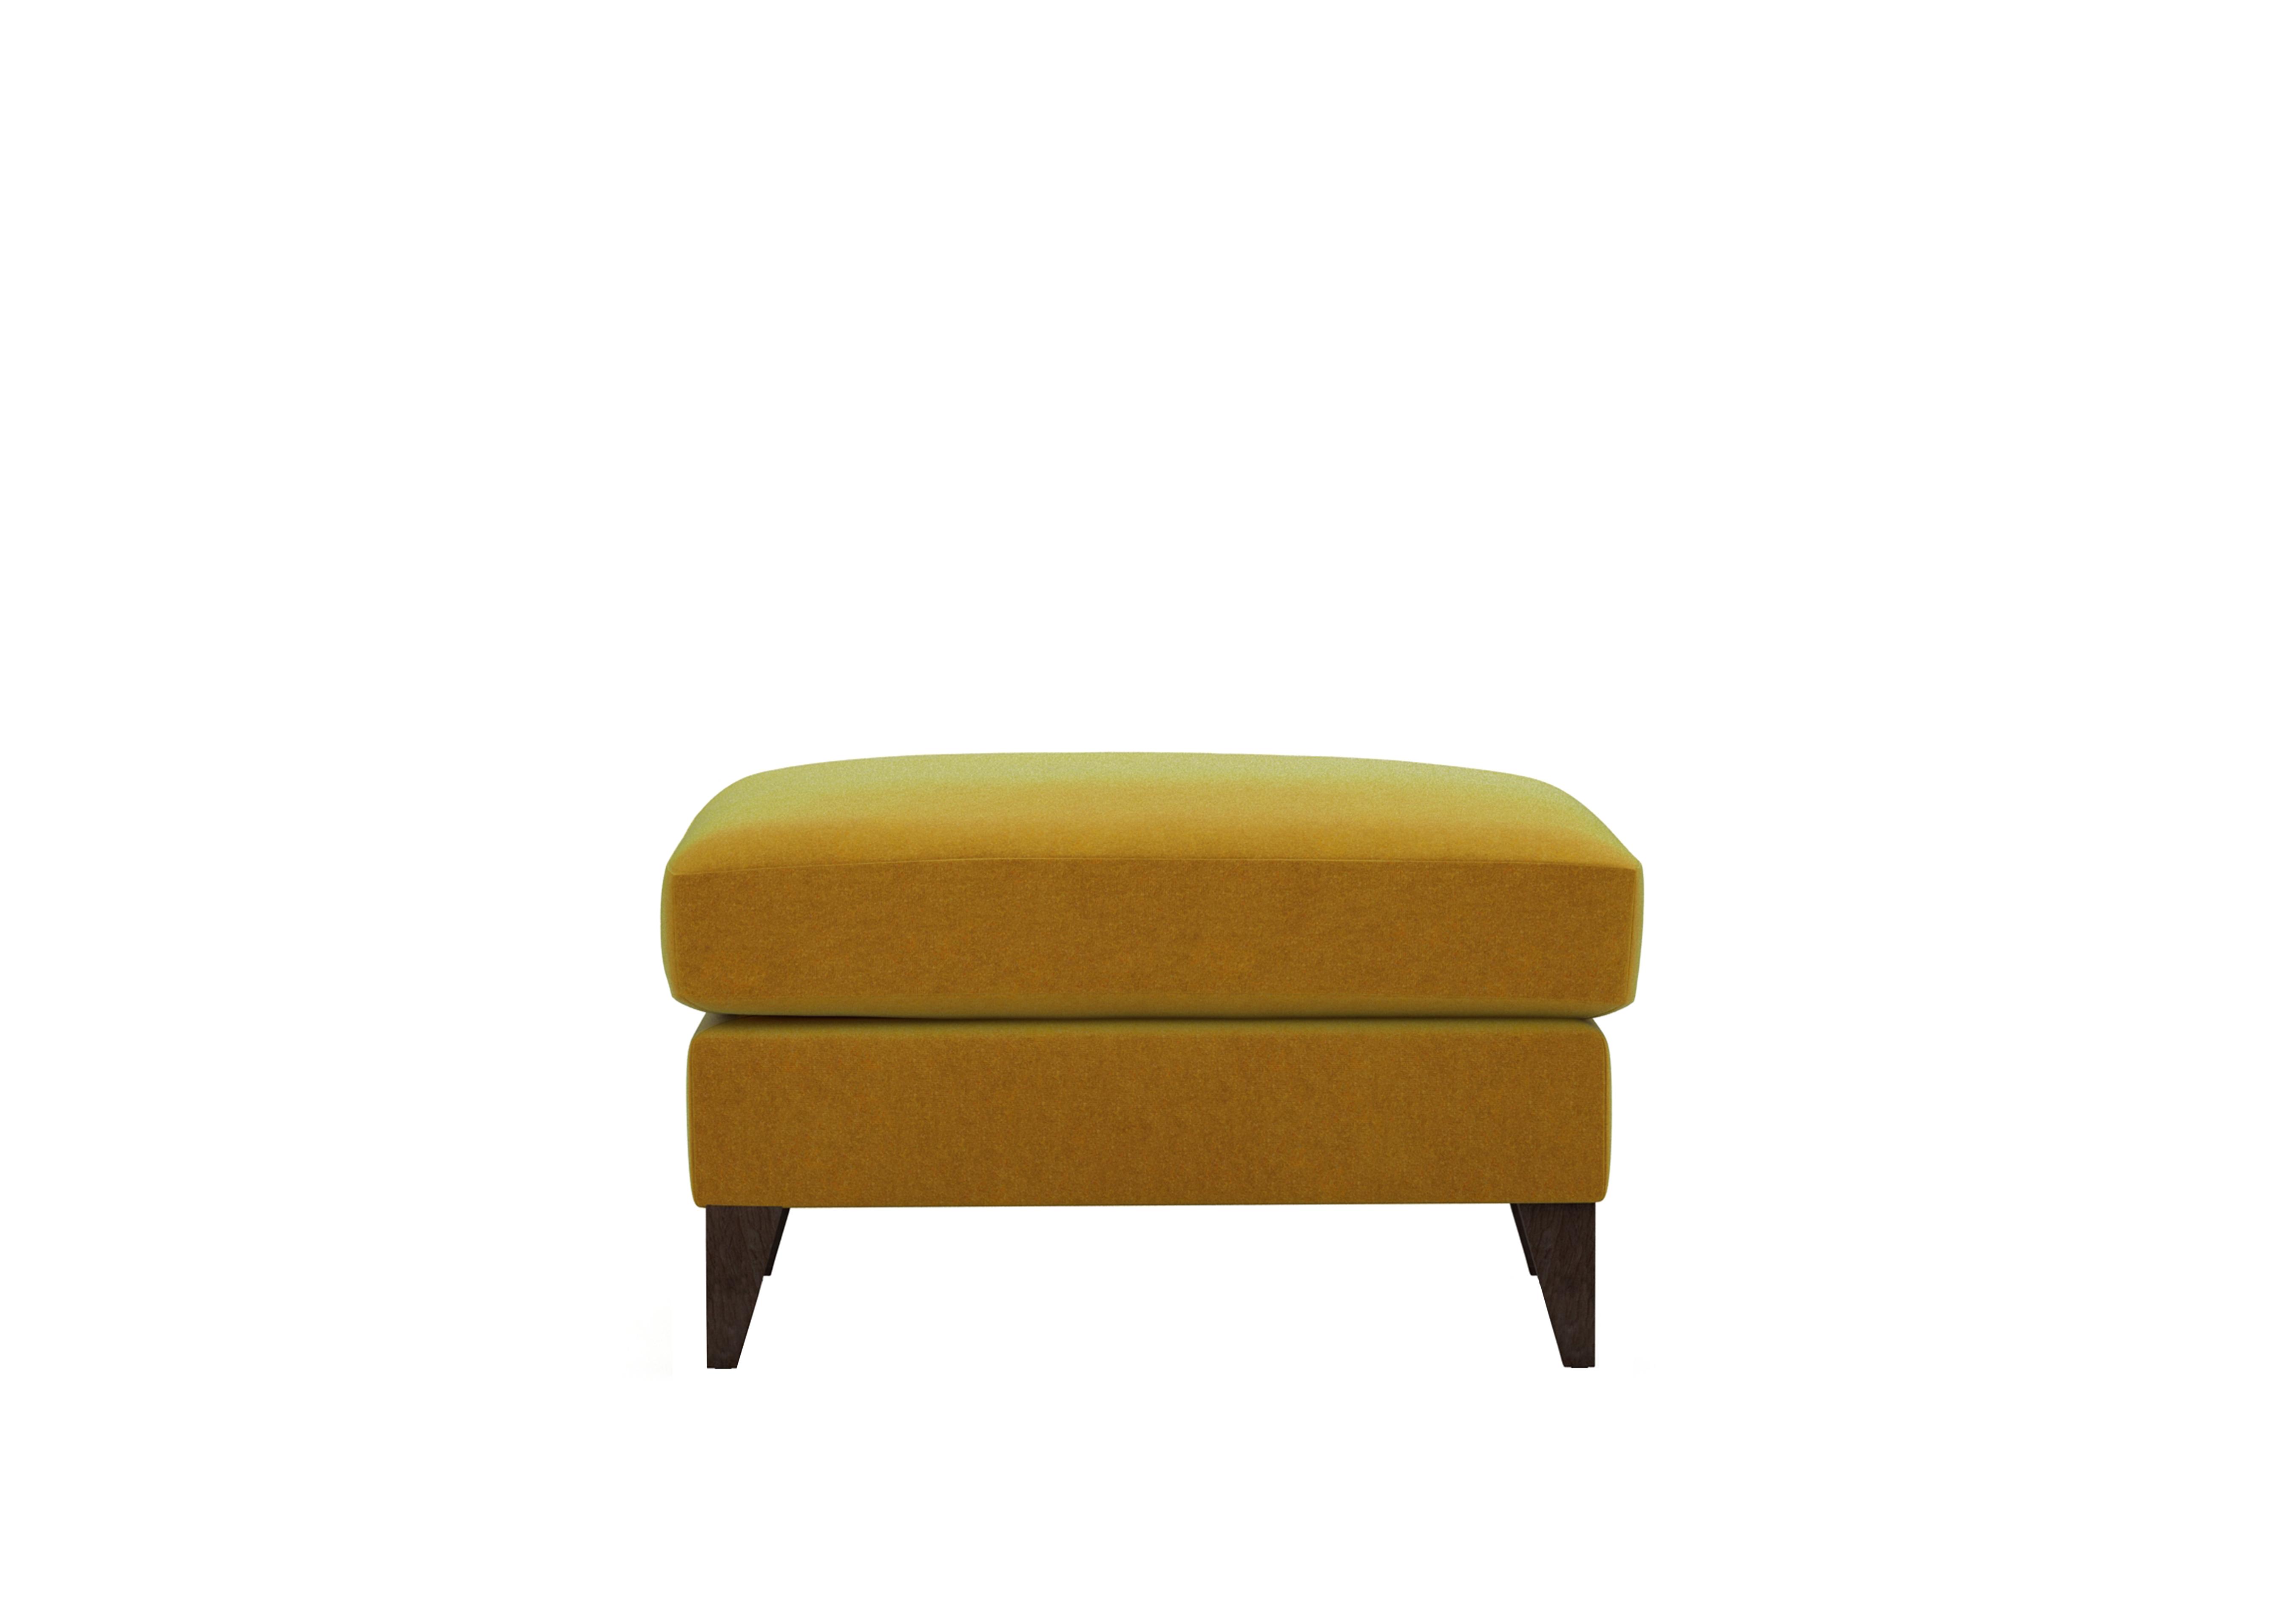 Romilly Fabric Footstool in Gol204 Golden Spice Wa Ft on Furniture Village